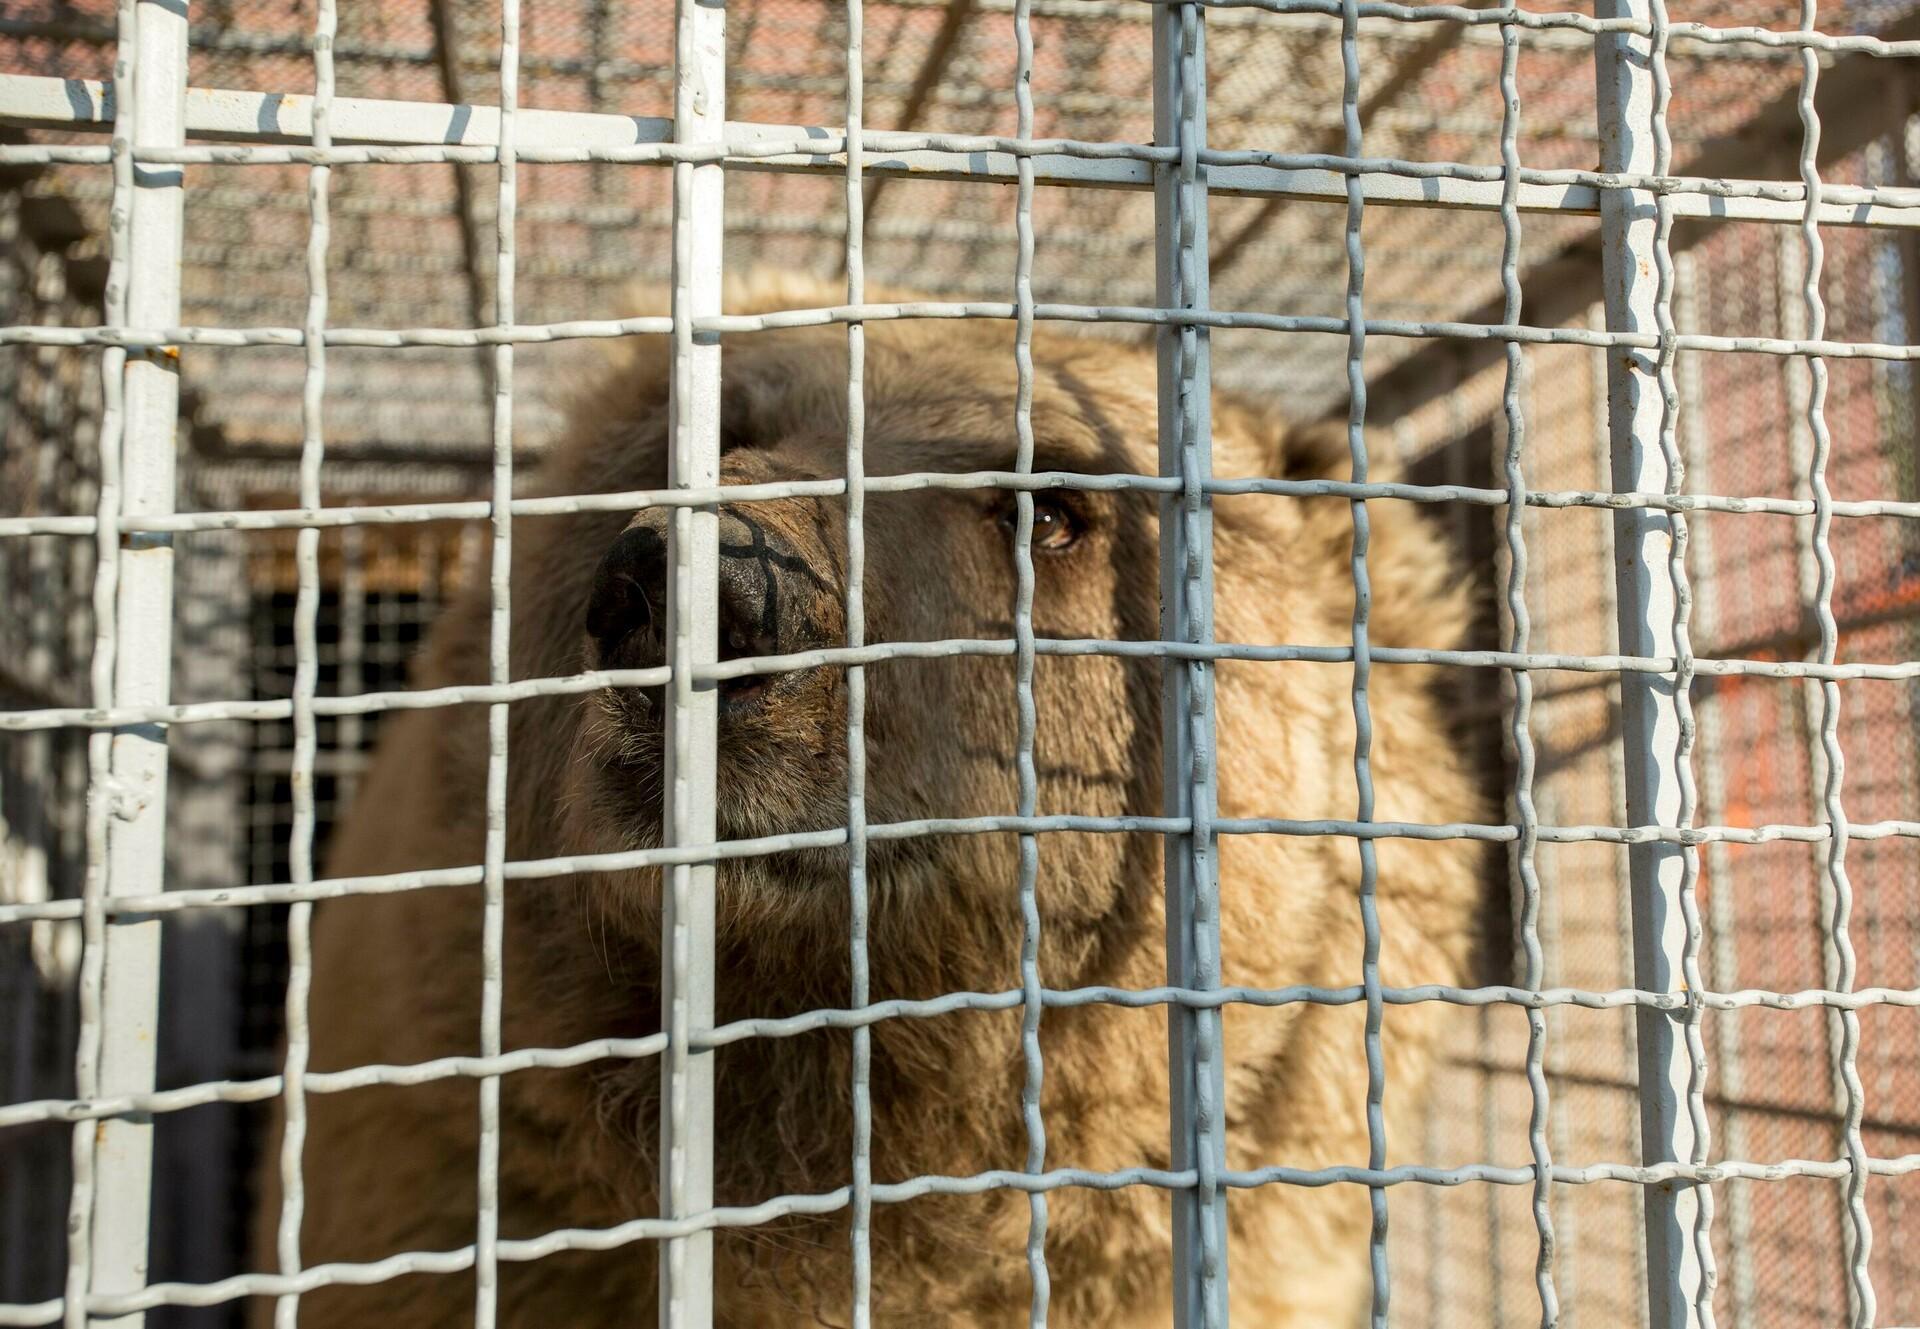 The end of Marghazar Zoo in Islamabad: FOUR PAWS relocates bears Suzie and  Bubloo to Jordan - FOUR PAWS International - Animal Welfare Organisation